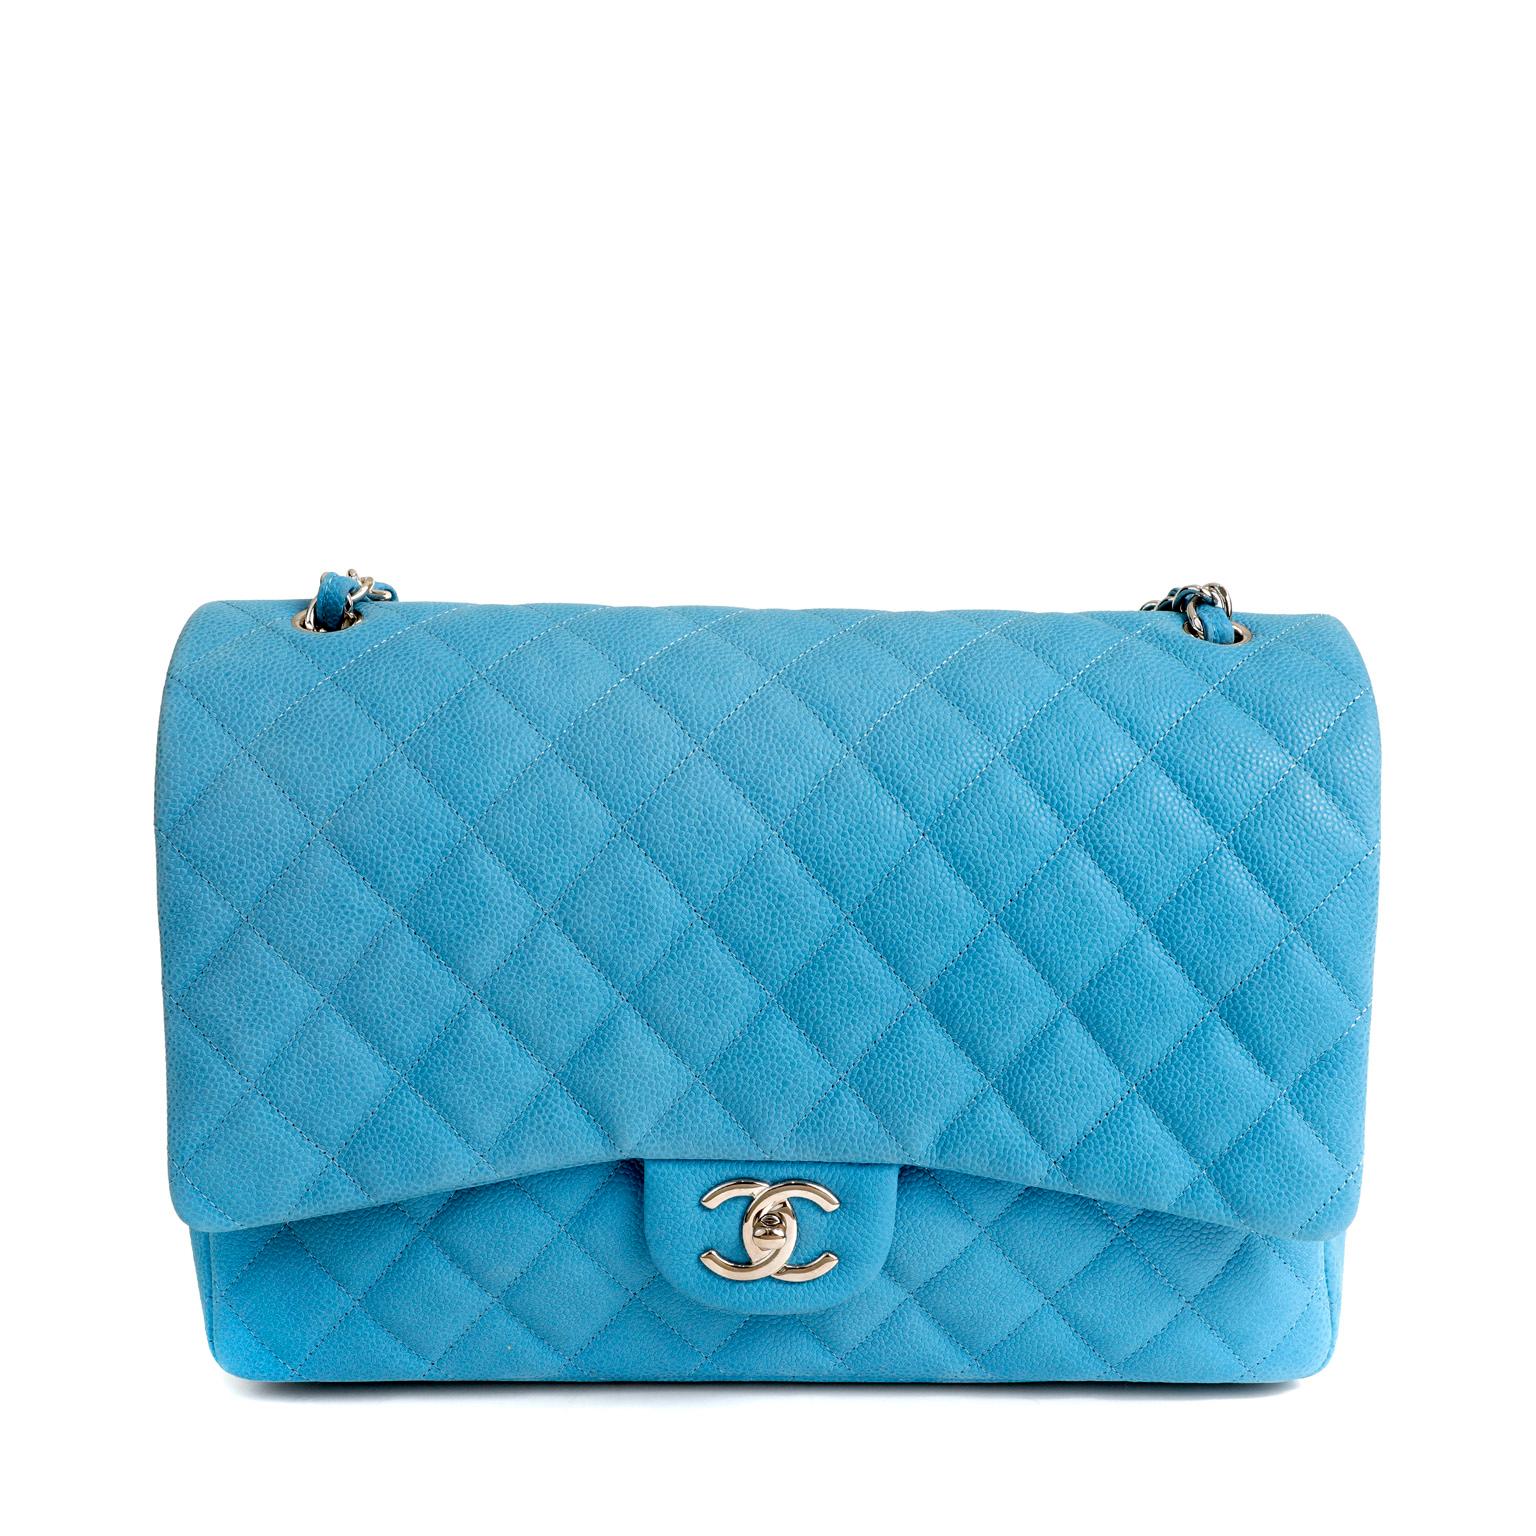 This authentic Chanel Blue Caviar Maxi is in pristine condition.  Showstopping bright blue paired with silver hardware is a stunning combination.  
Vibrant brushed caviar leather is textured and durable.  Quilted in signature Chanel diamond pattern